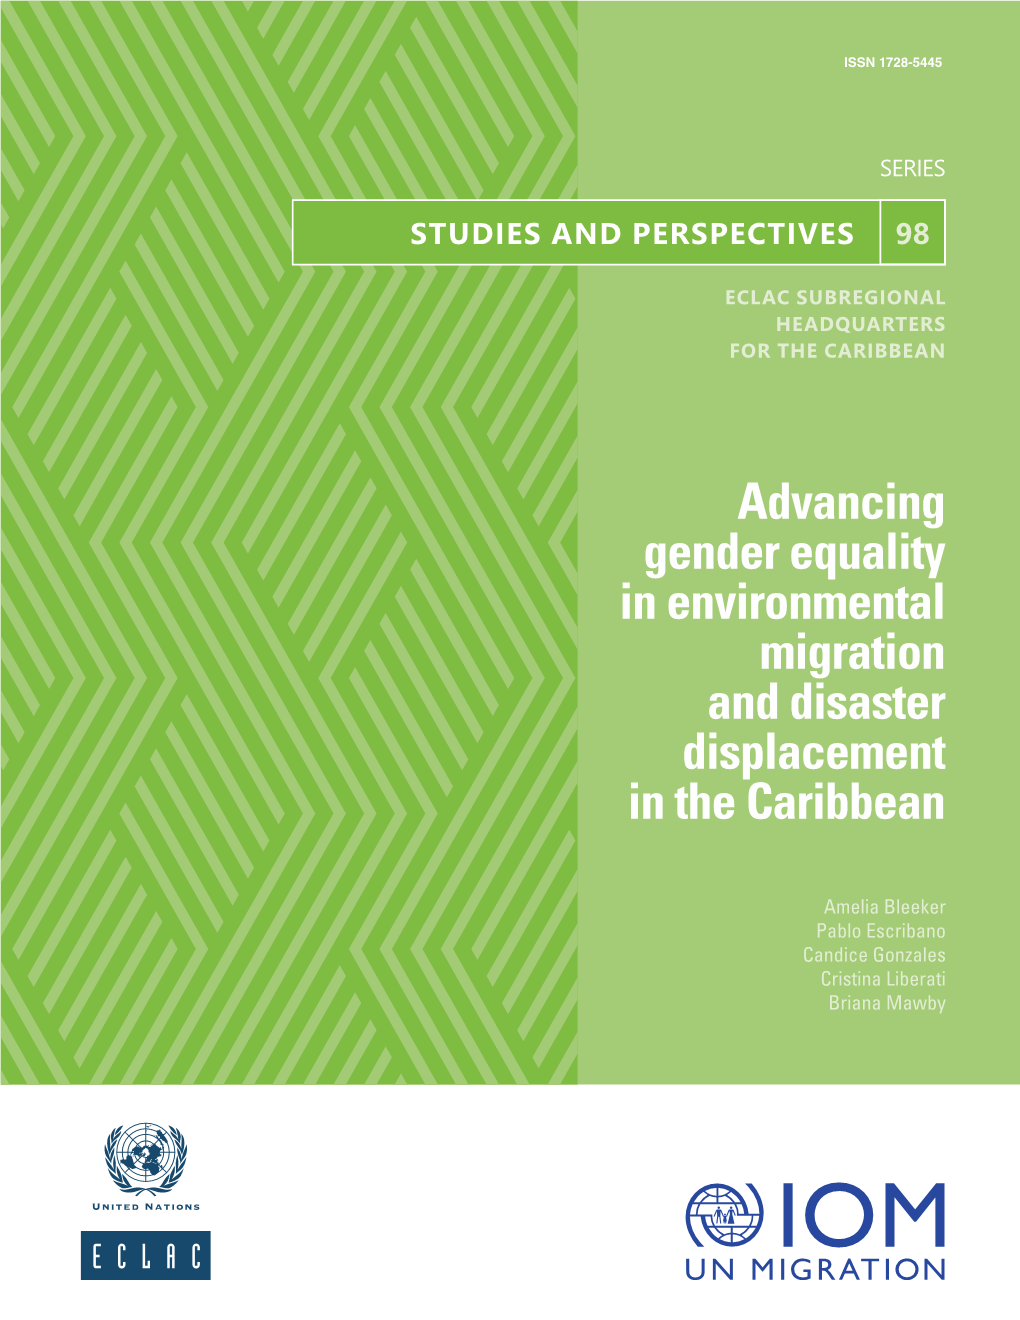 Advancing Gender Equality in Environmental Migration and Disaster Displacement in the Caribbean